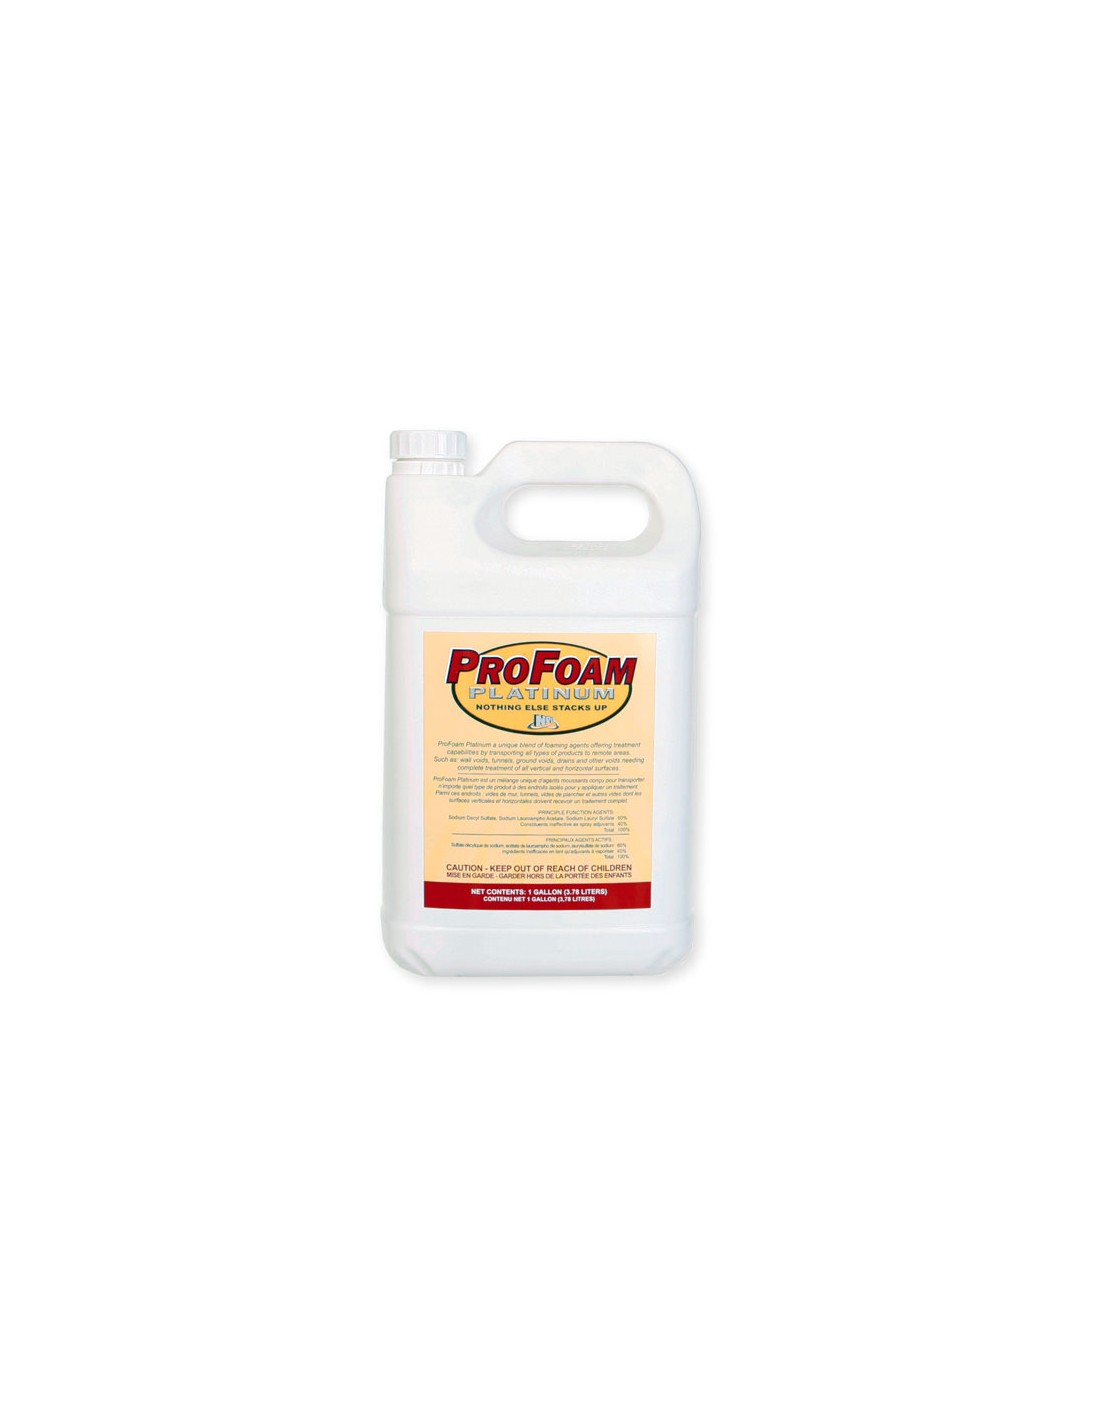 Can I use profoam with boracare in a standard garden pump up sprayer?